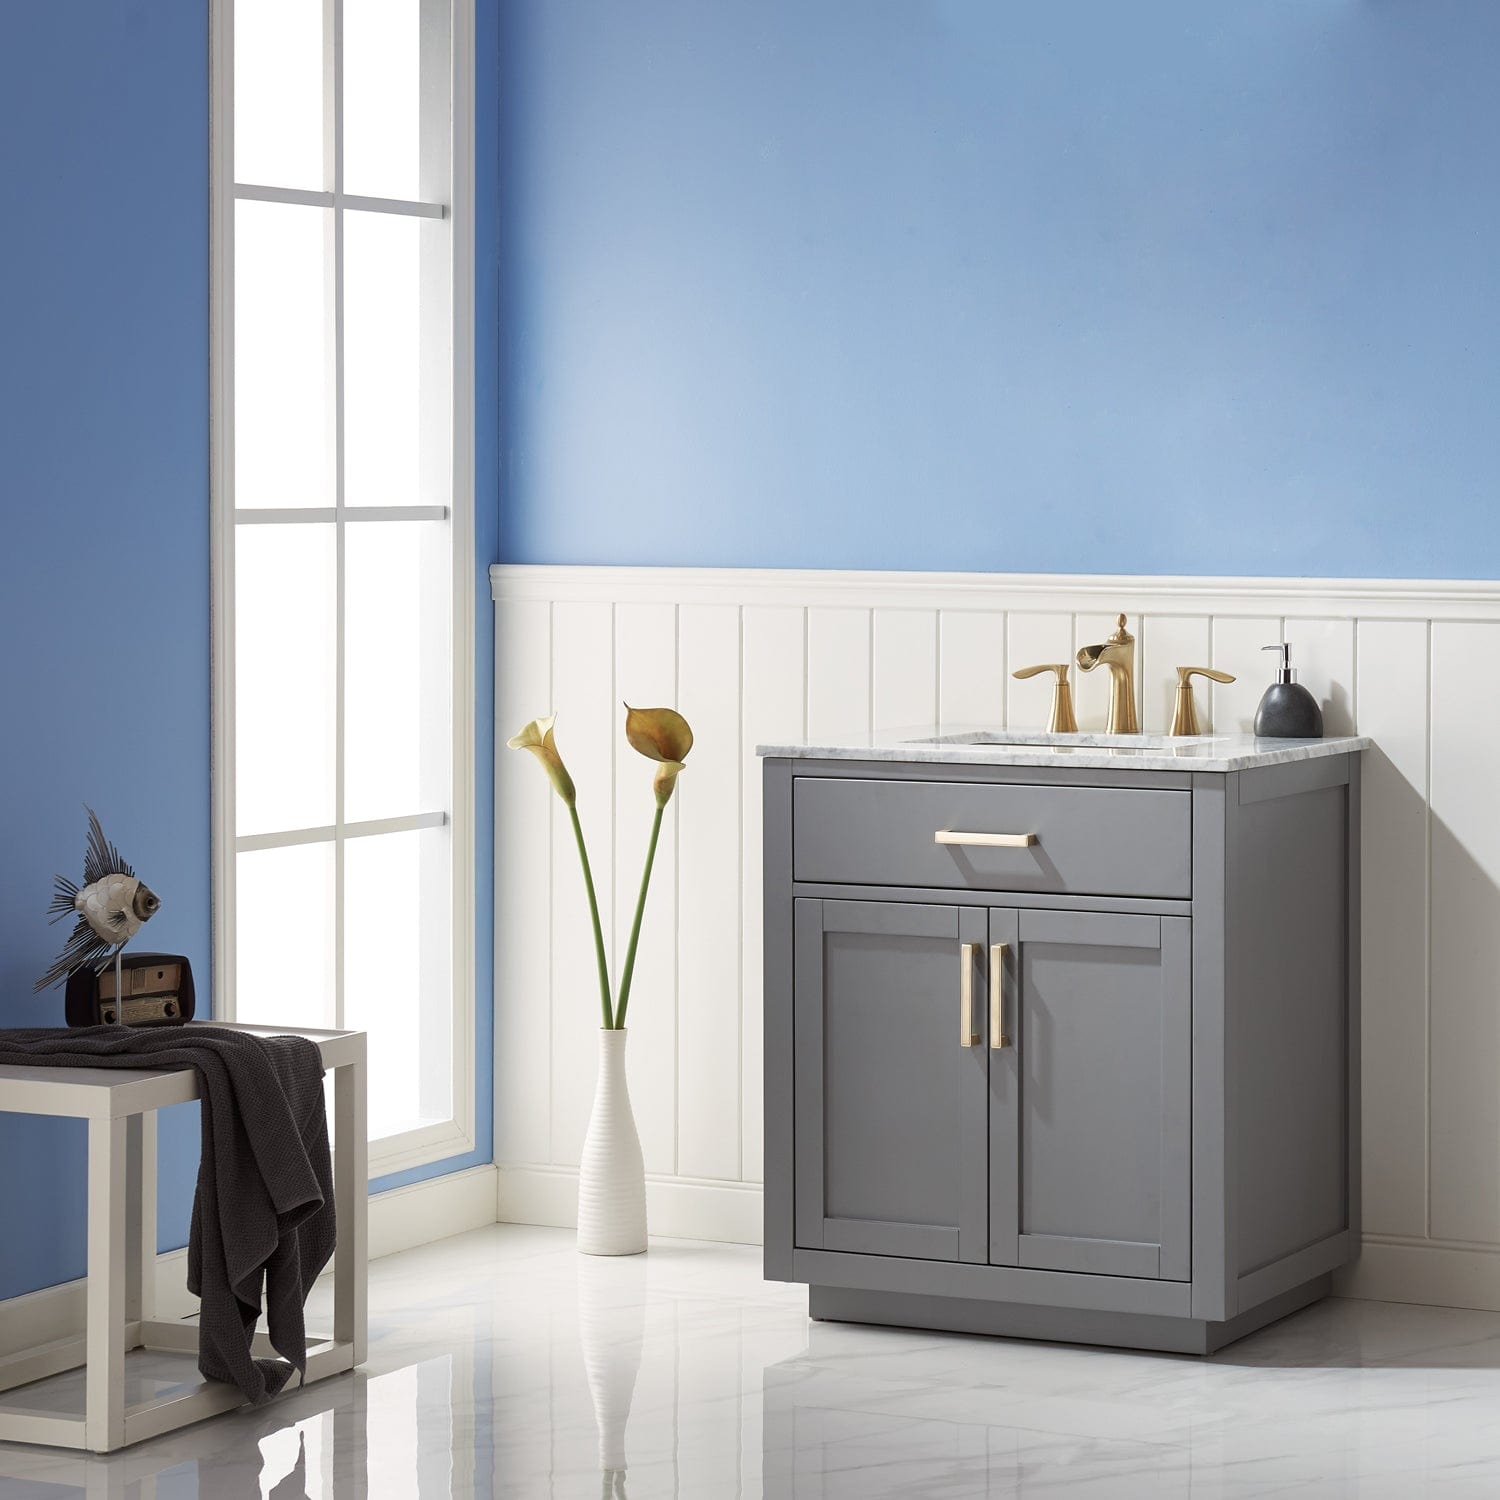 Altair Ivy 30" Single Bathroom Vanity Set in Gray and Carrara White Marble Countertop without Mirror 531030-GR-CA-NM - Molaix631112971041Vanity531030-GR-CA-NM